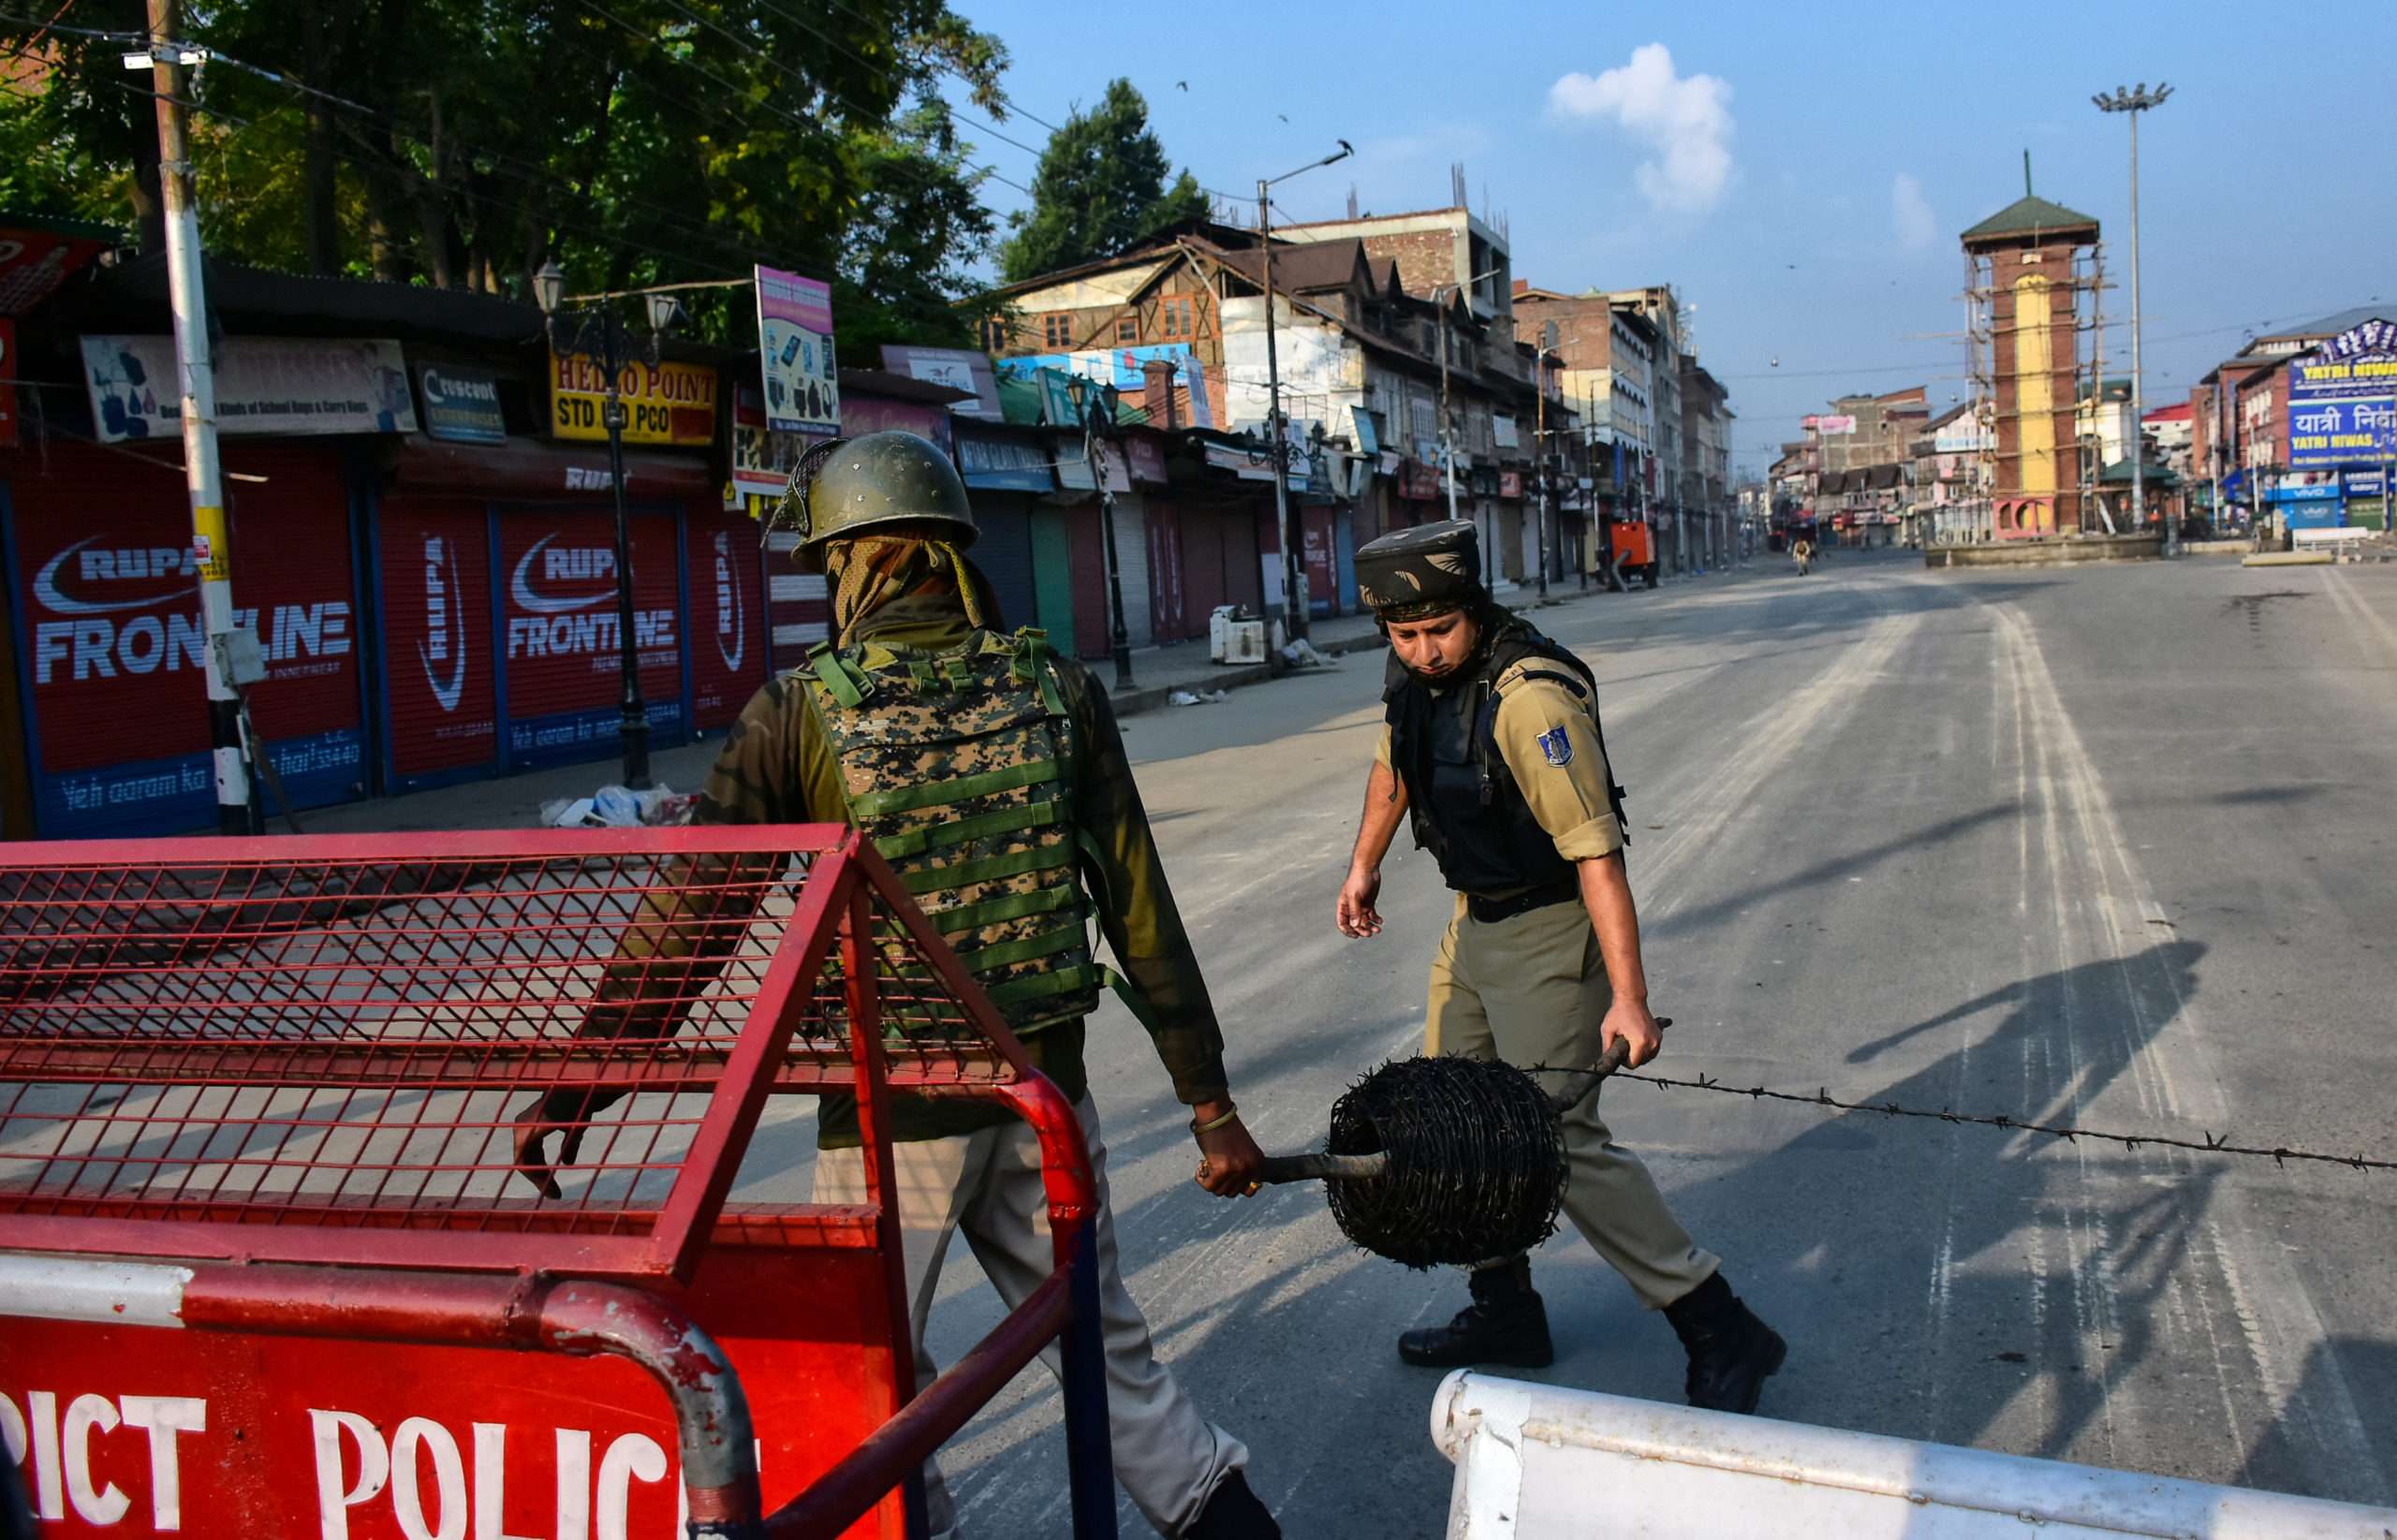 Indian paramilitary troopers closes the road leading to Clock tower with barbed wire during curfew in Srinagar , Indian Administered Kashmir on 05 August 2019. Strict curfew was implemented in Kashmir on 05 August 2019 following the decision to scrap Article 370 which gave a special status to Kashmiri people. A complete communication blackout and curfew is implemented in Kashmir Valley from Midnight 05 August 2019.